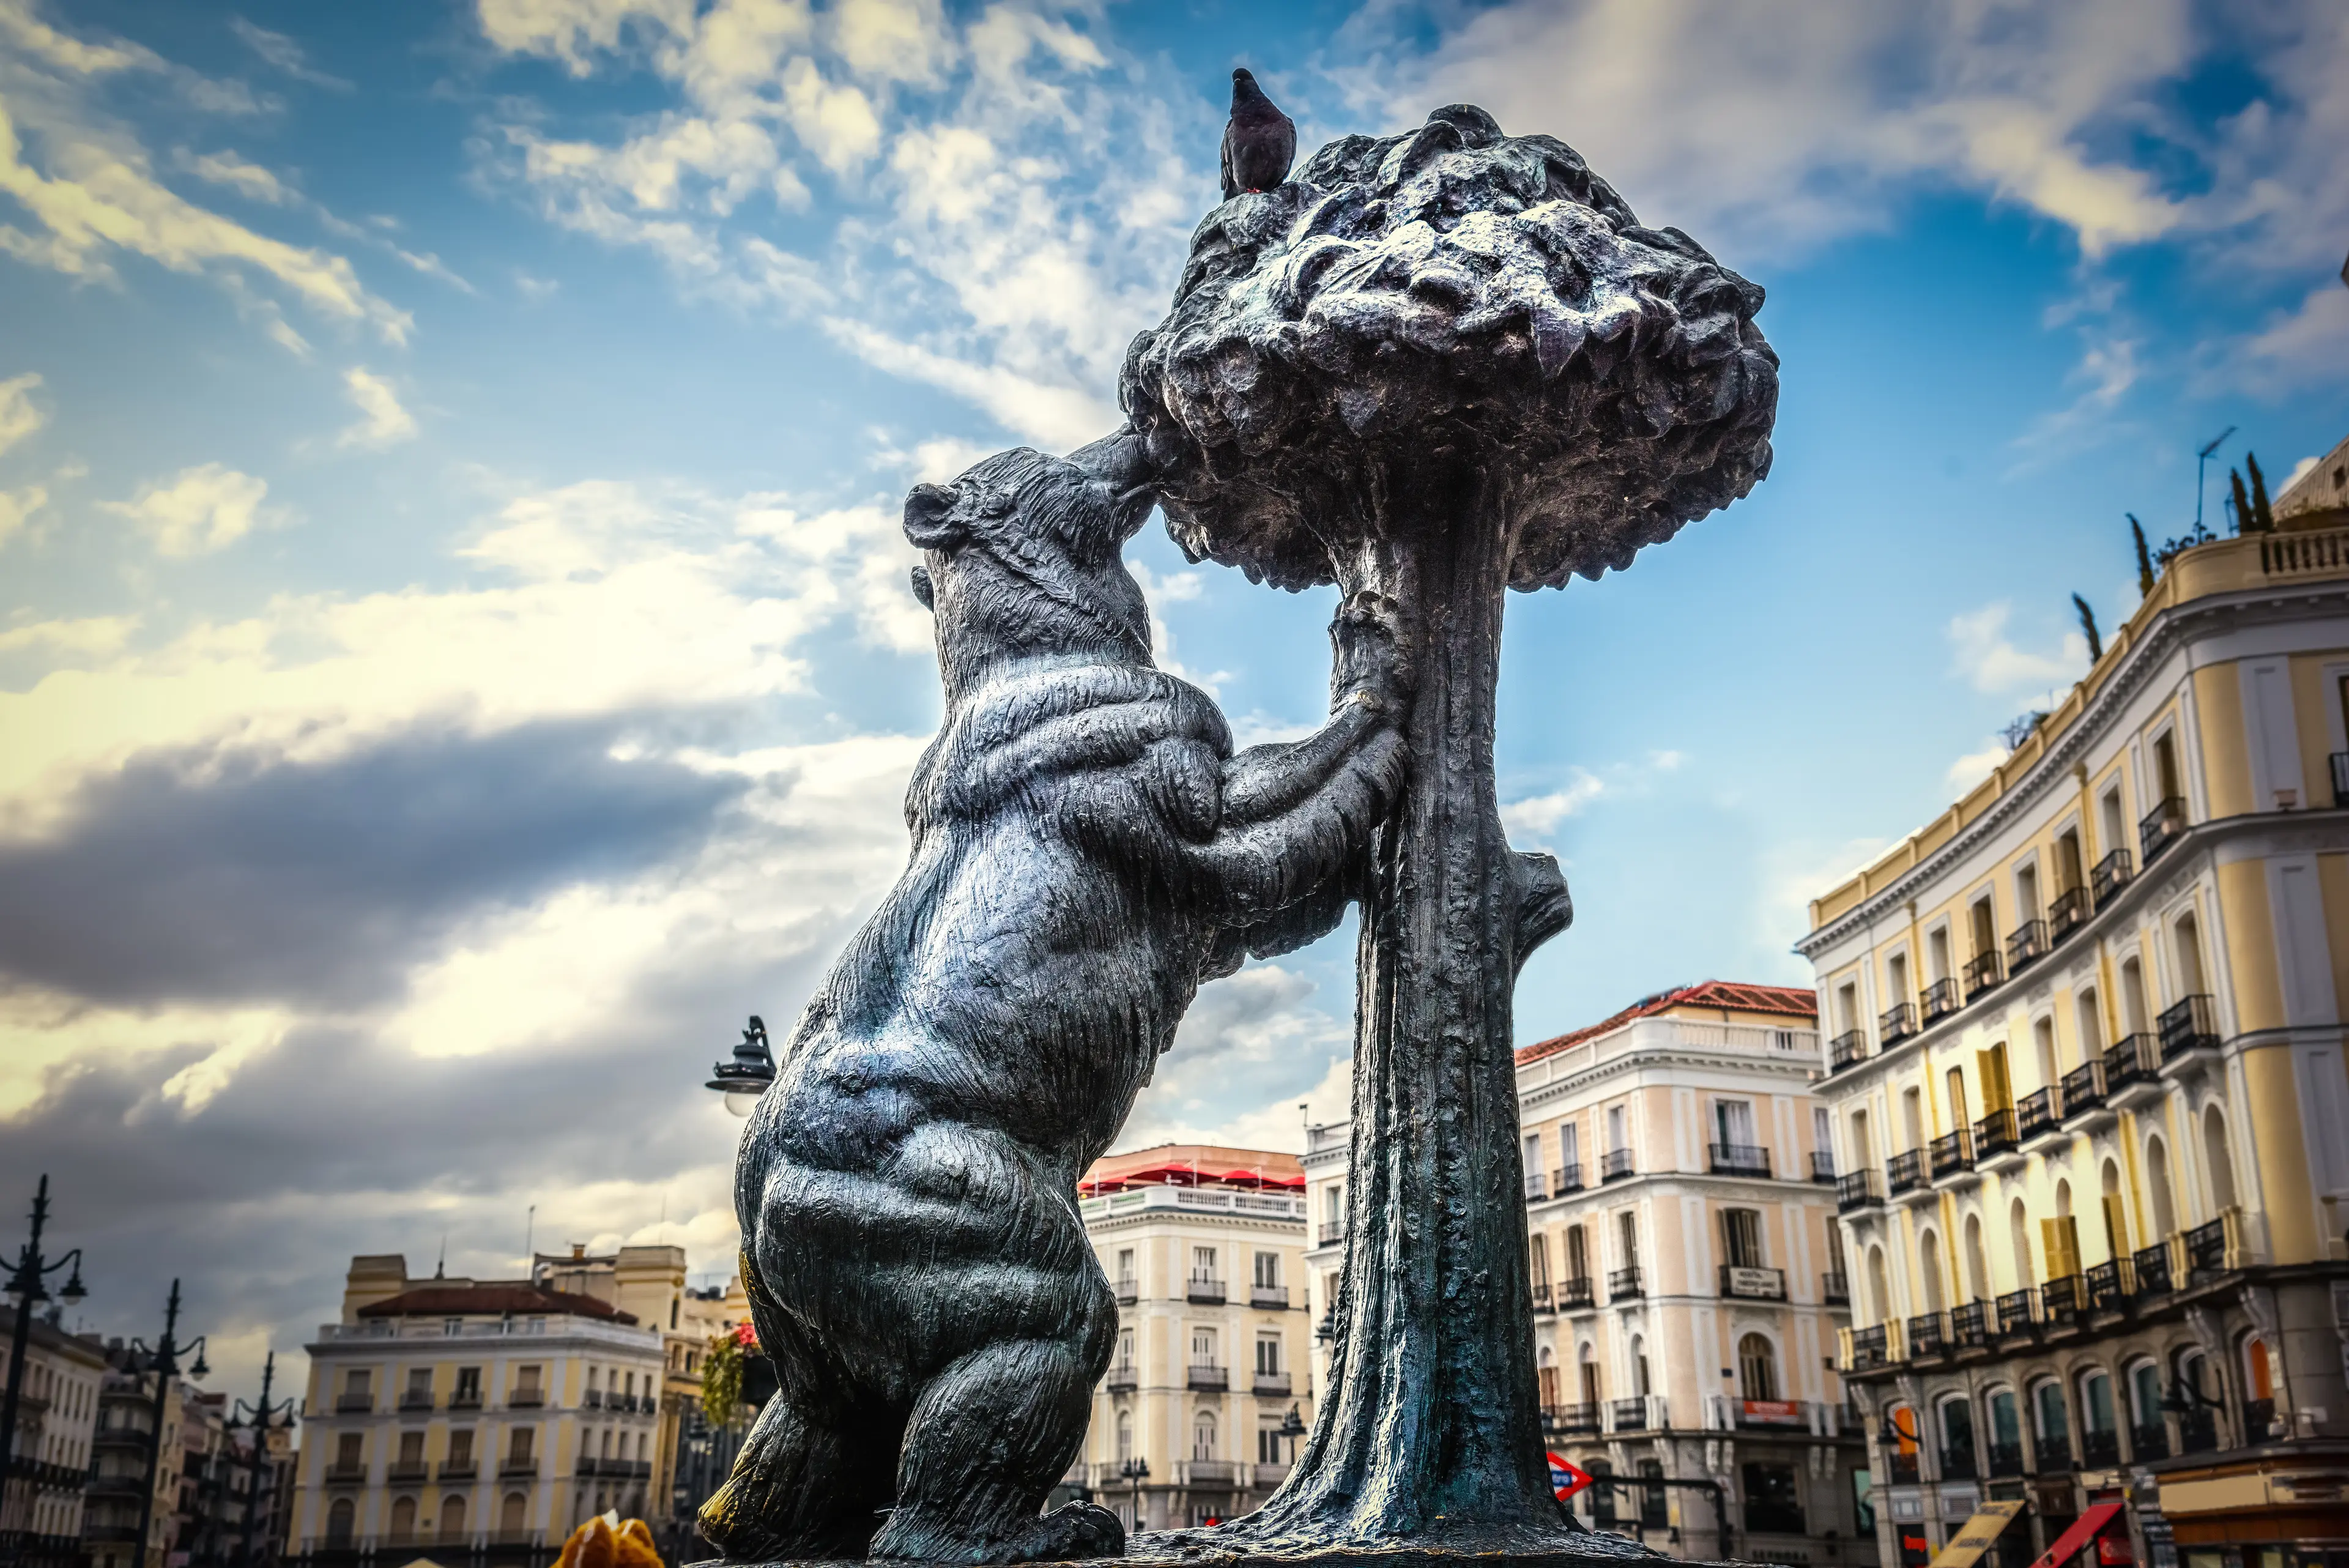 4-Day Local Madrid Experience: Sightseeing, Food and Wine with Friends